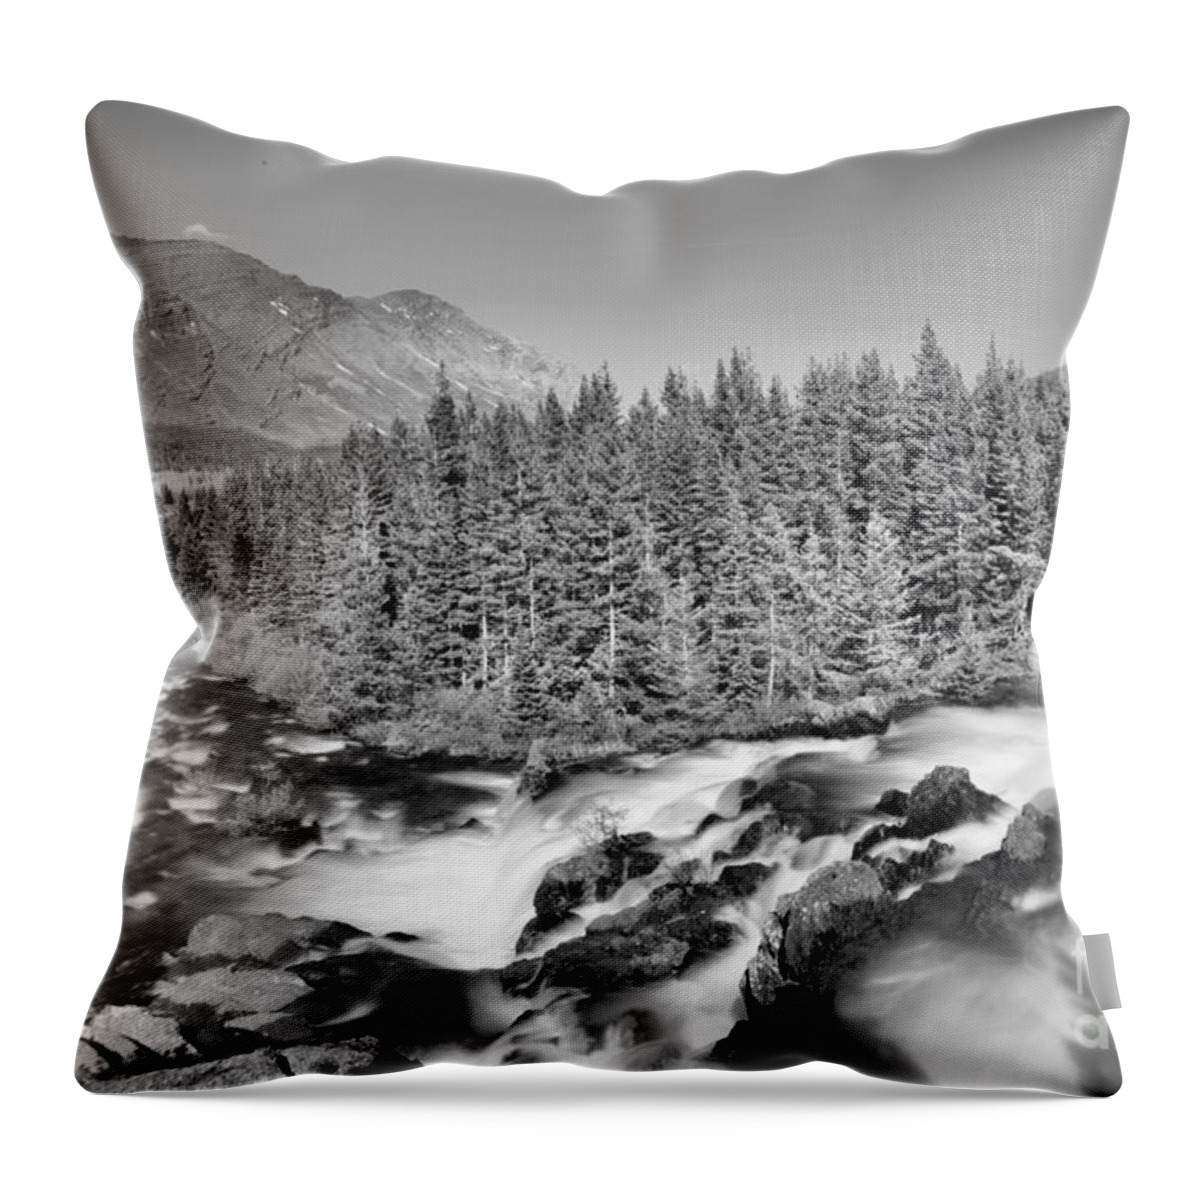 Red Rock Falls Throw Pillow featuring the photograph Looking Down Glacier Red Rock Falls Black And White by Adam Jewell